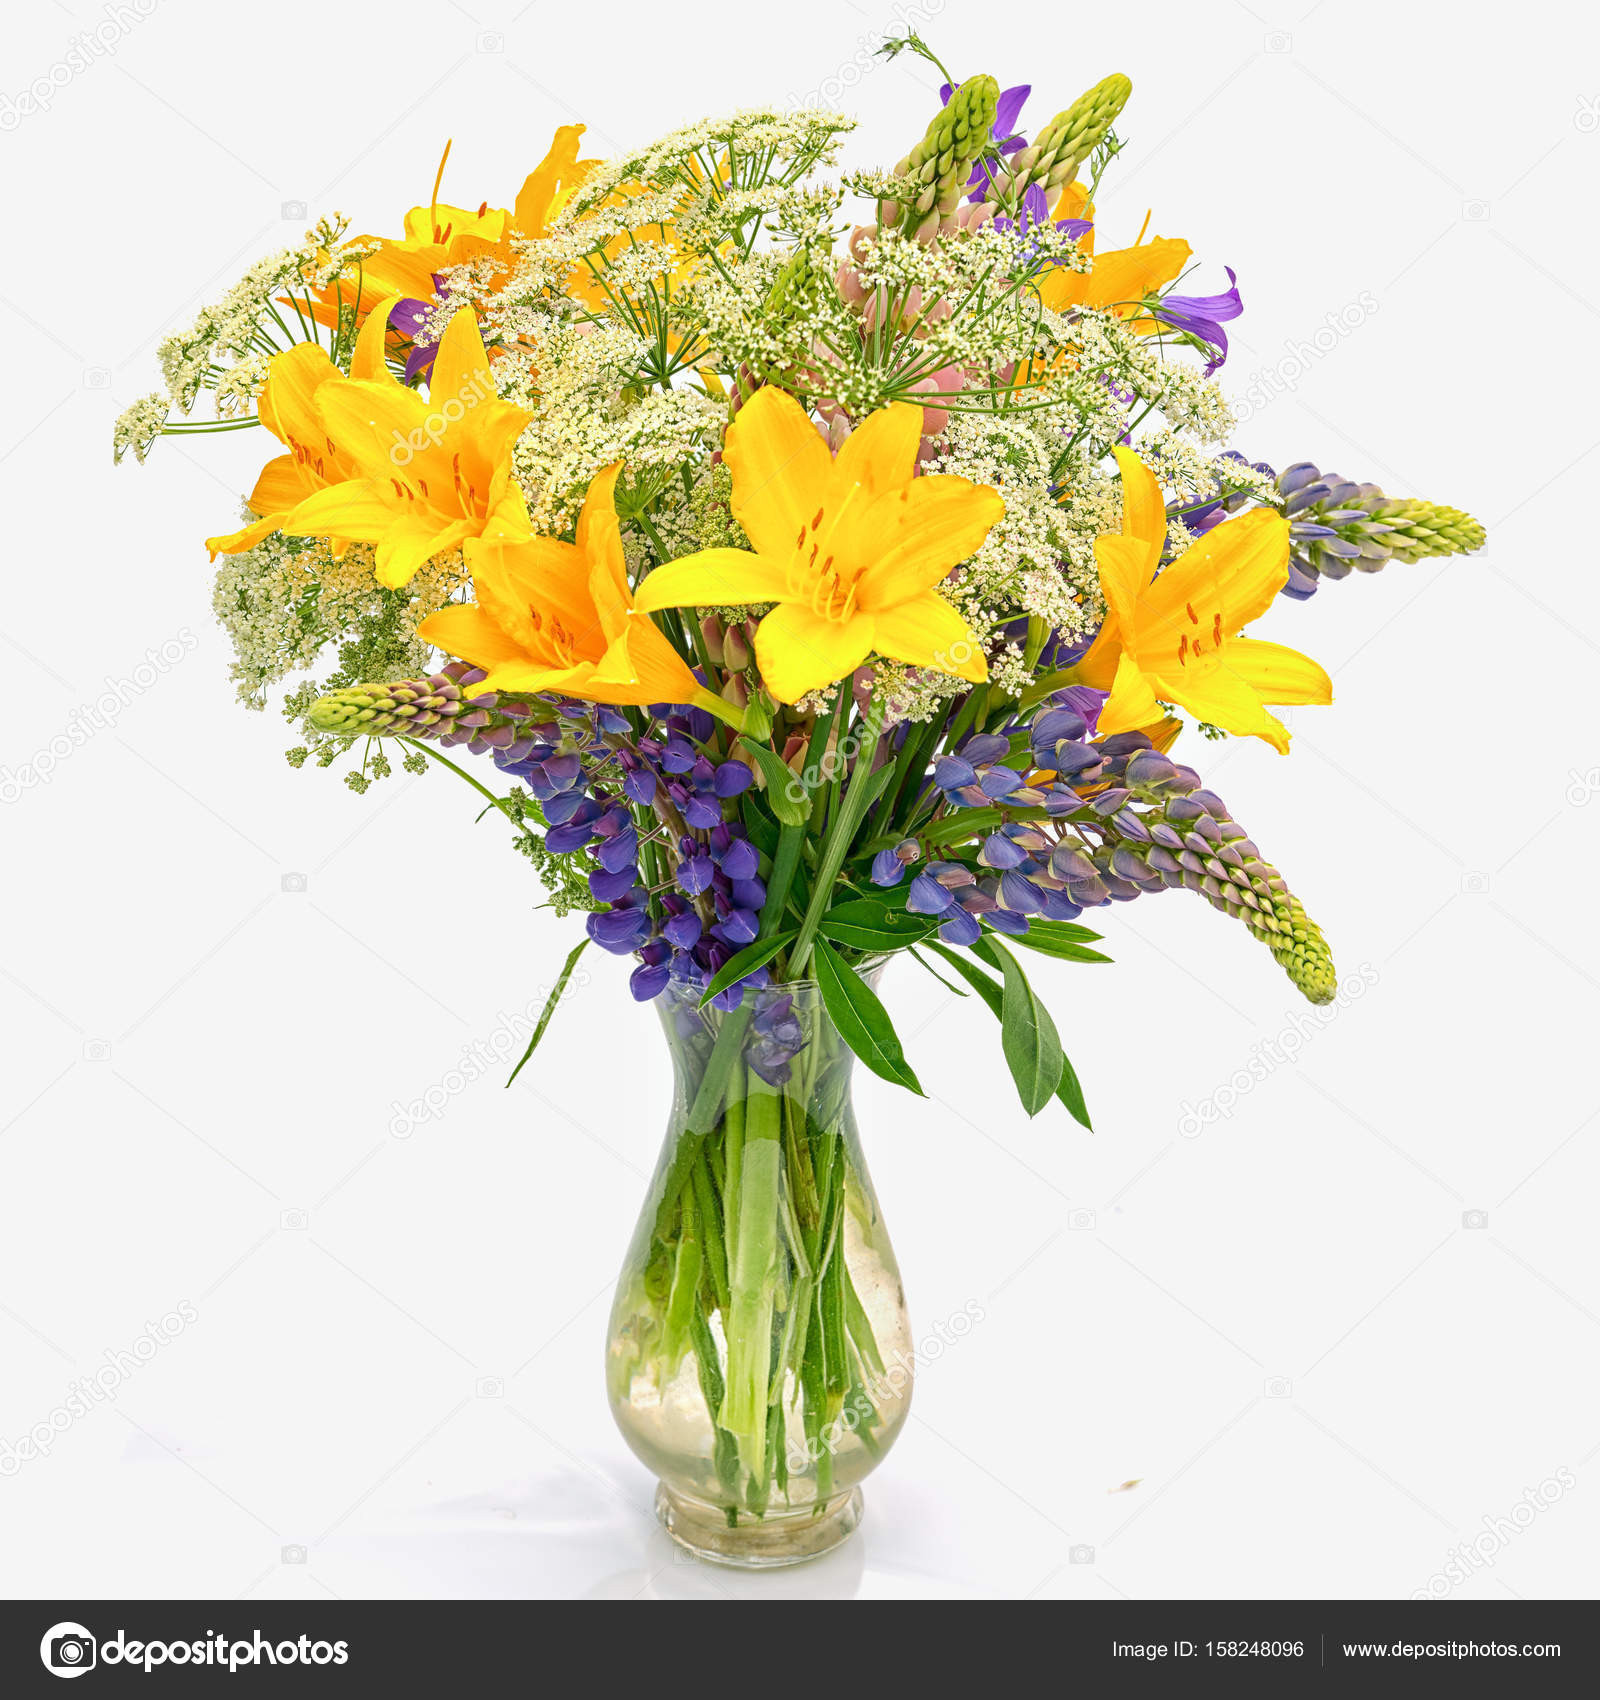 14 Lovable Tree Stump Vases for Sale 2024 free download tree stump vases for sale of yellow glass vase collection decorating ideas for vases elegant il inside yellow glass vase photograph bouquet od wild flowers achillea millefolium day lily and 